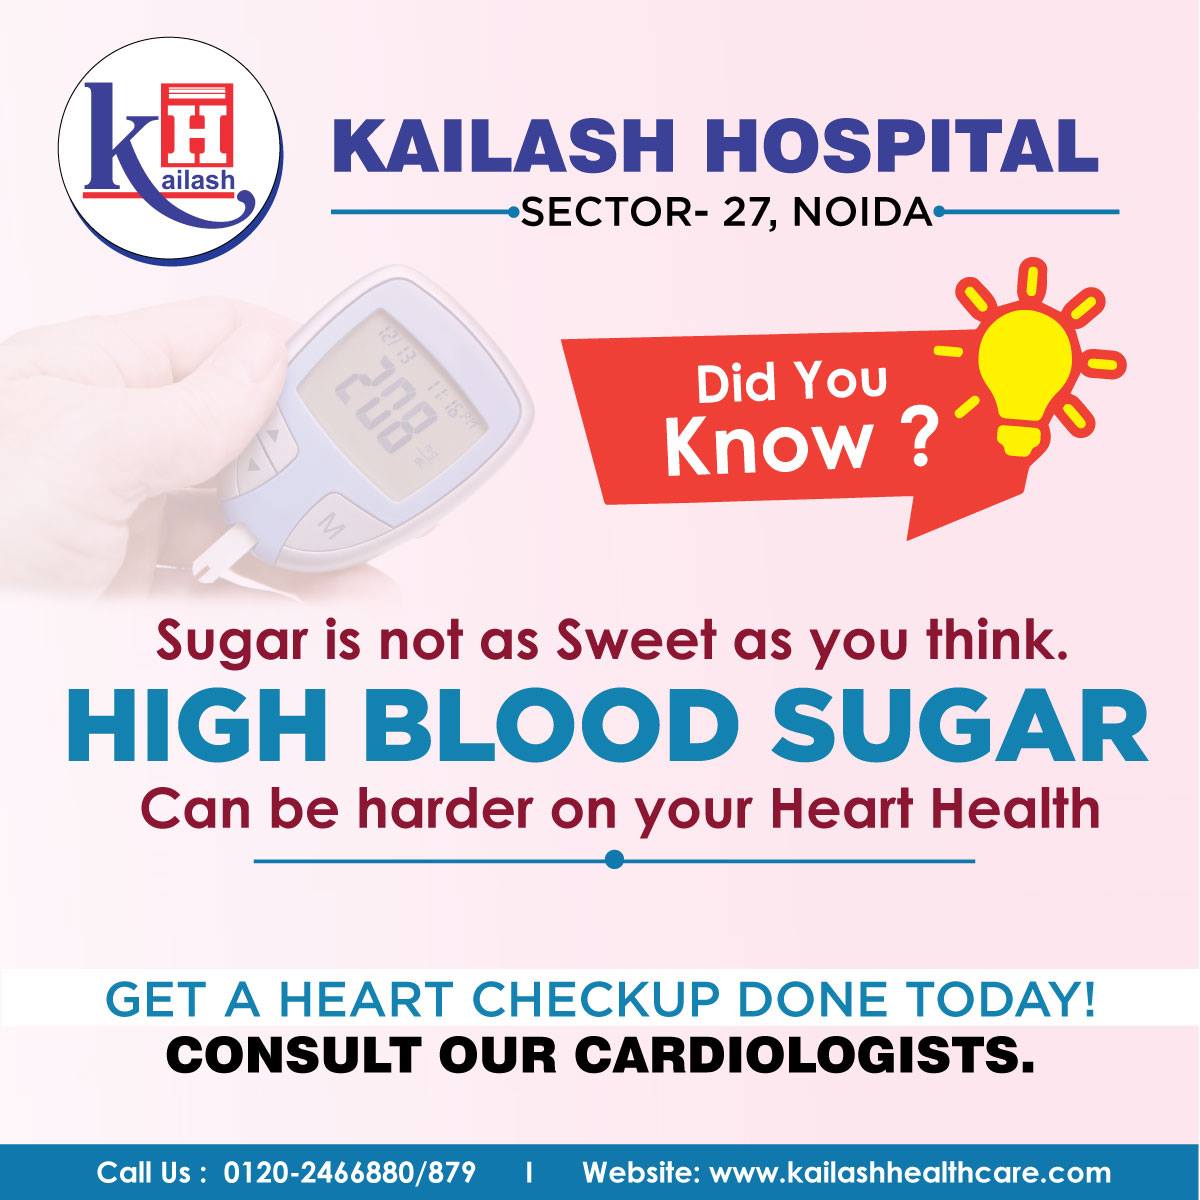 High Blood Sugar can increase the risk of Cholesterol built up & Cardiovascular diseases. Get a heart checkup done today!